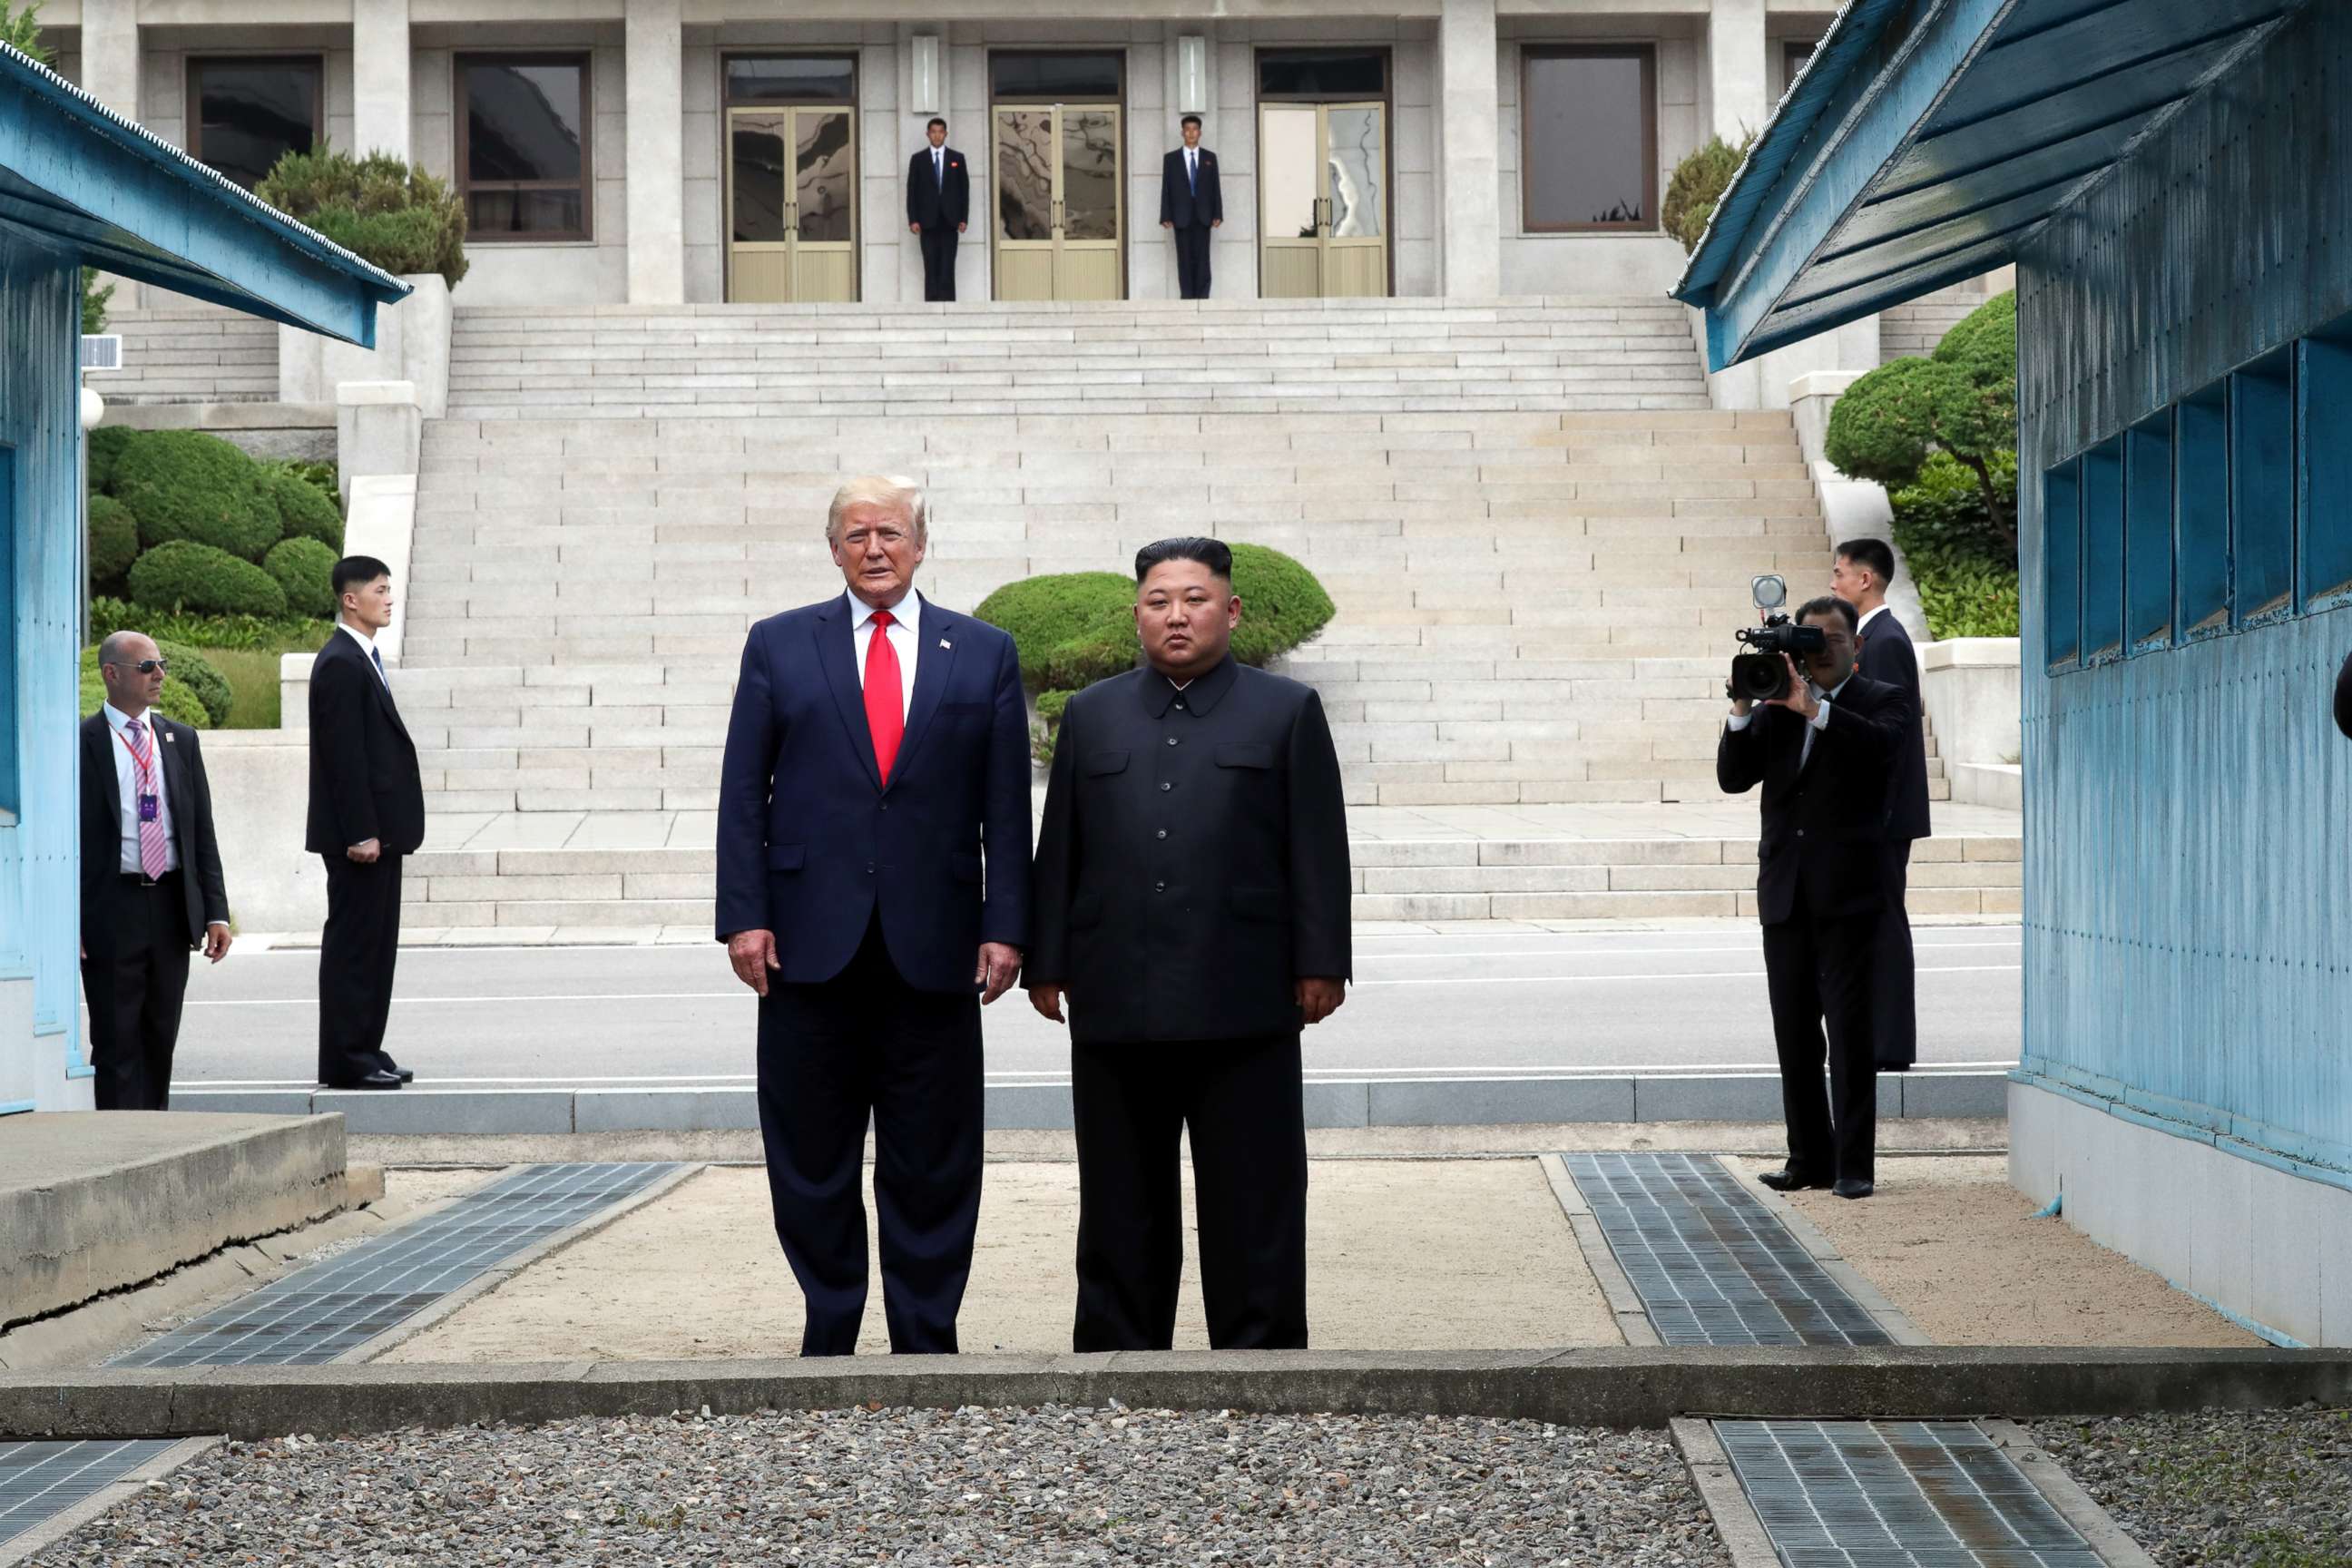 PHOTO: A handout photo provided by Dong-A Ilbo of North Korean leader Kim Jong Un and U.S. President Donald Trump inside the demilitarized zone (DMZ) separating the South and North Korea on June 30, 2019 in Panmunjom, South Korea.